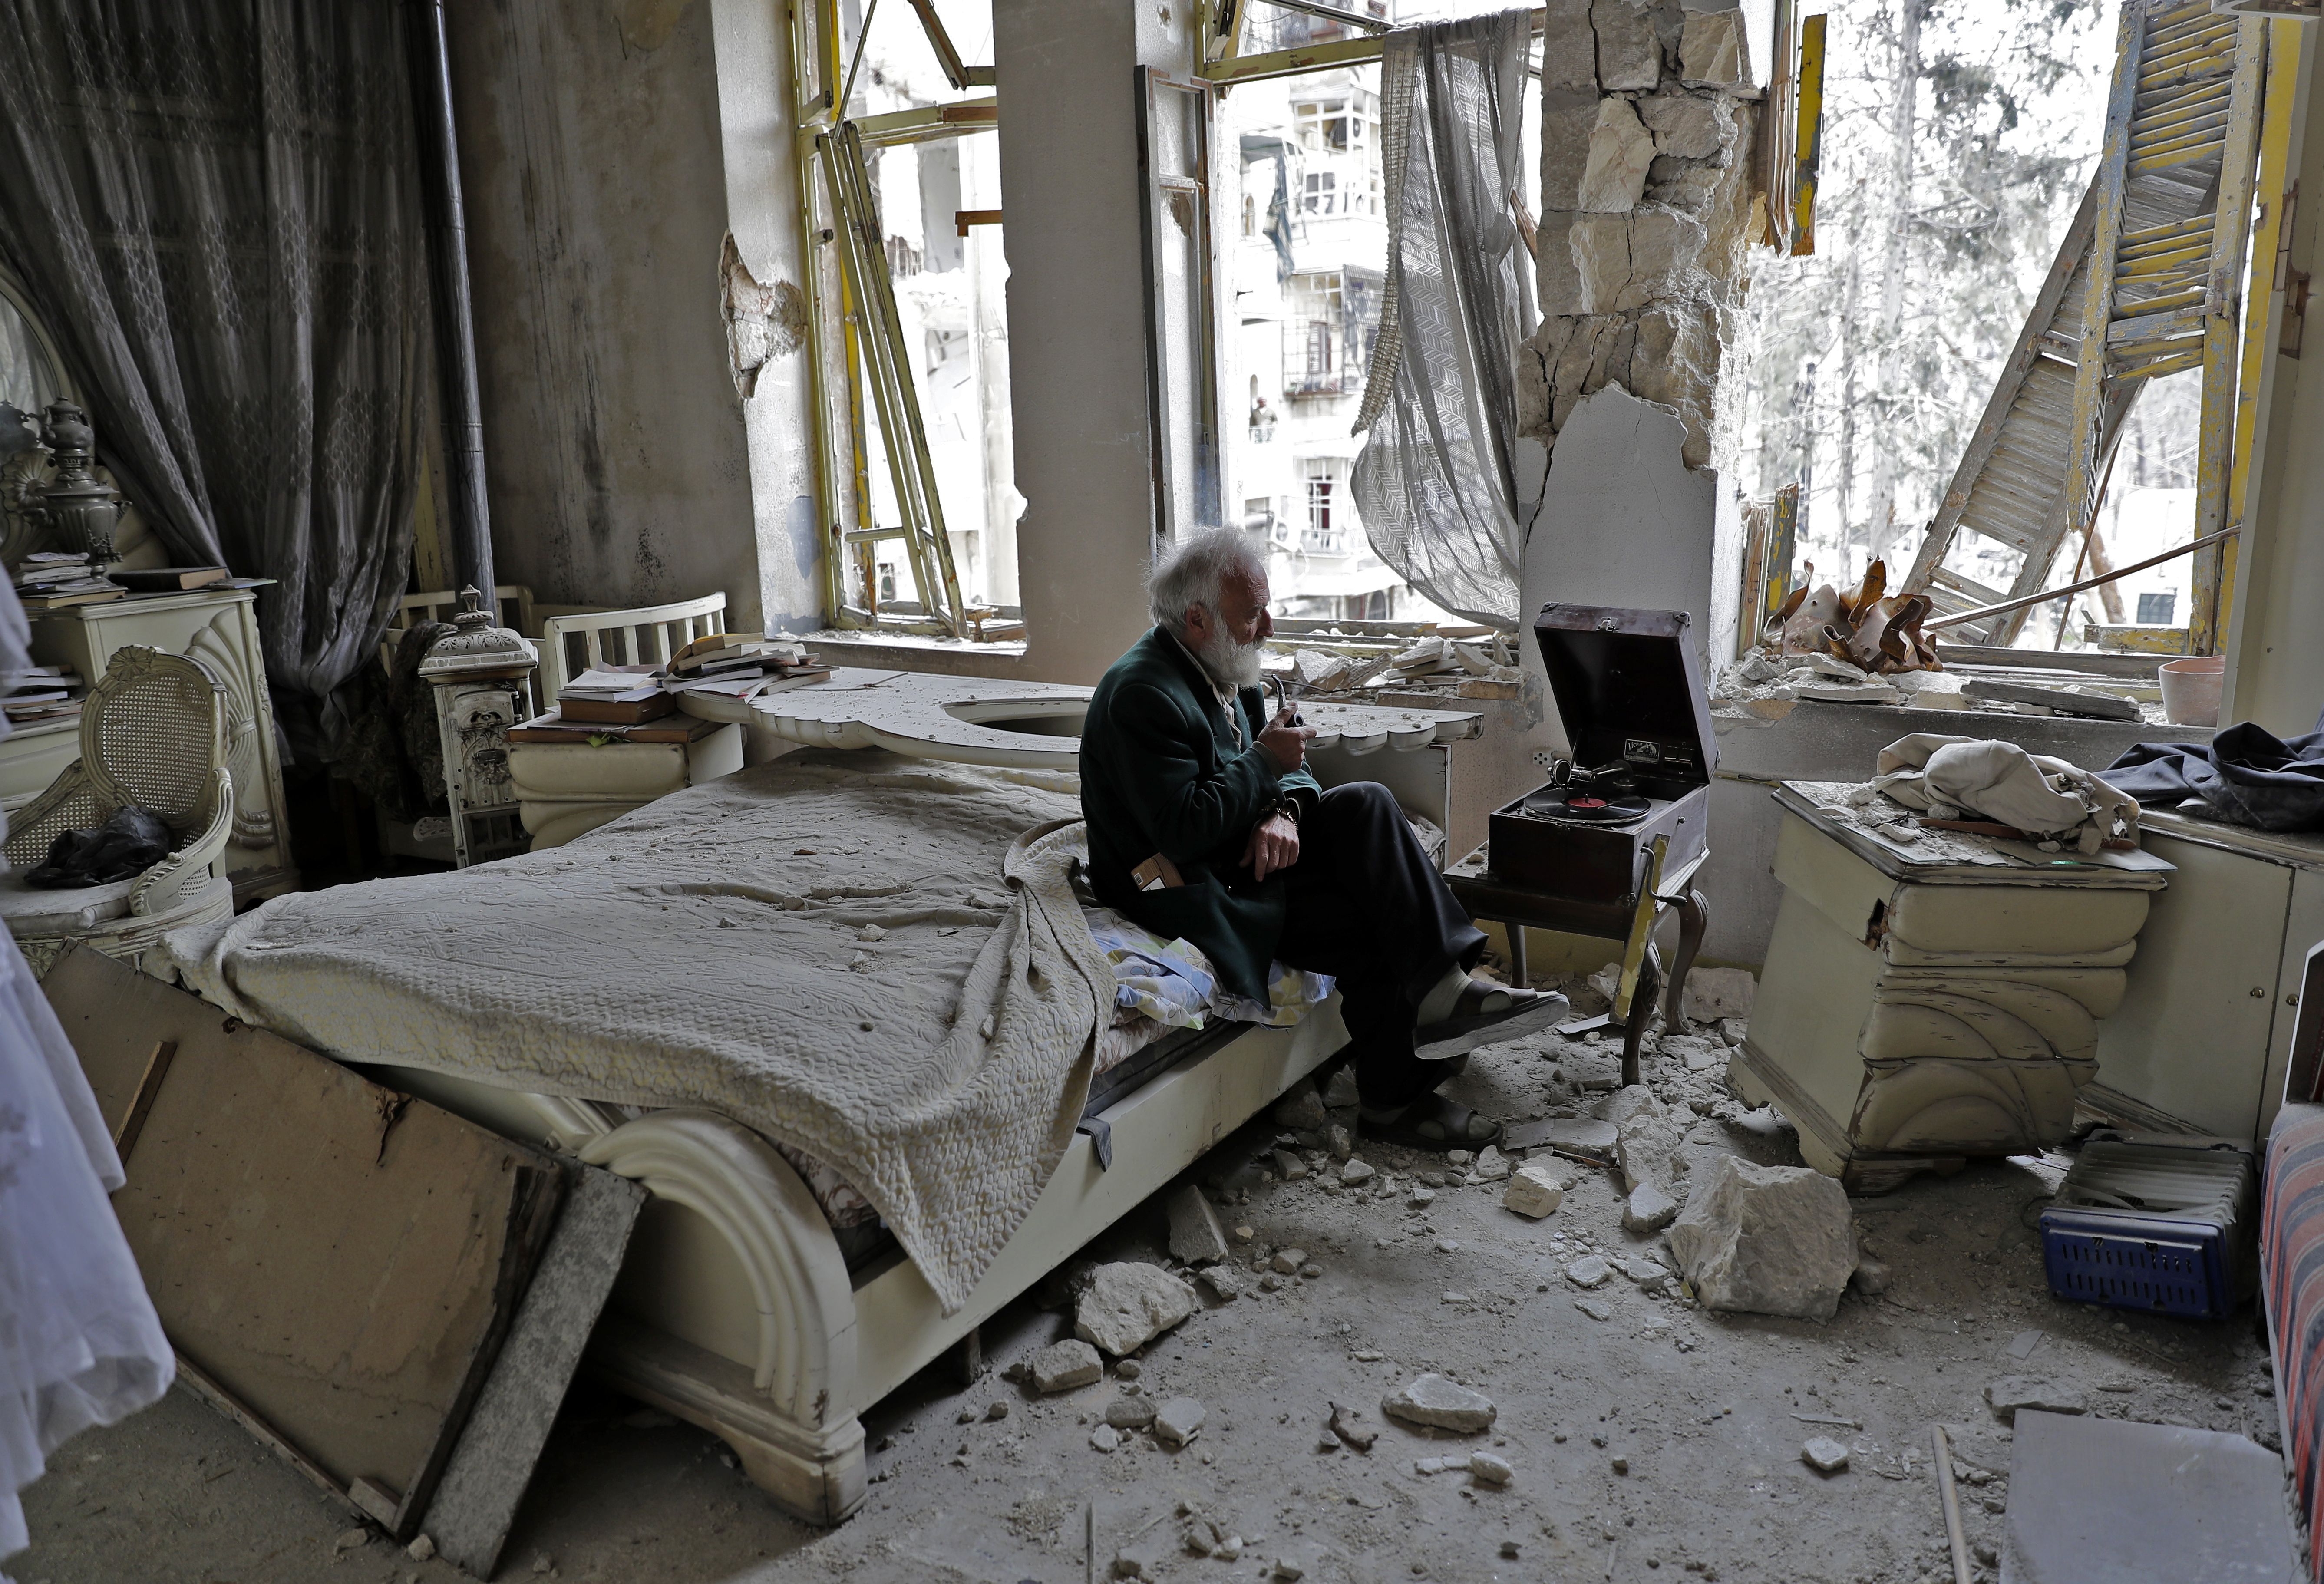  Mohammad Mohiedine Anis, 70, smokes his pipe as he sits in his destroyed bedroom listening to music on his vinyl player, gramophone, in Aleppo's formerly rebel-held al-Shaar neighbourhood. / AFP PHOTO / JOSEPH EID / Getty Images.